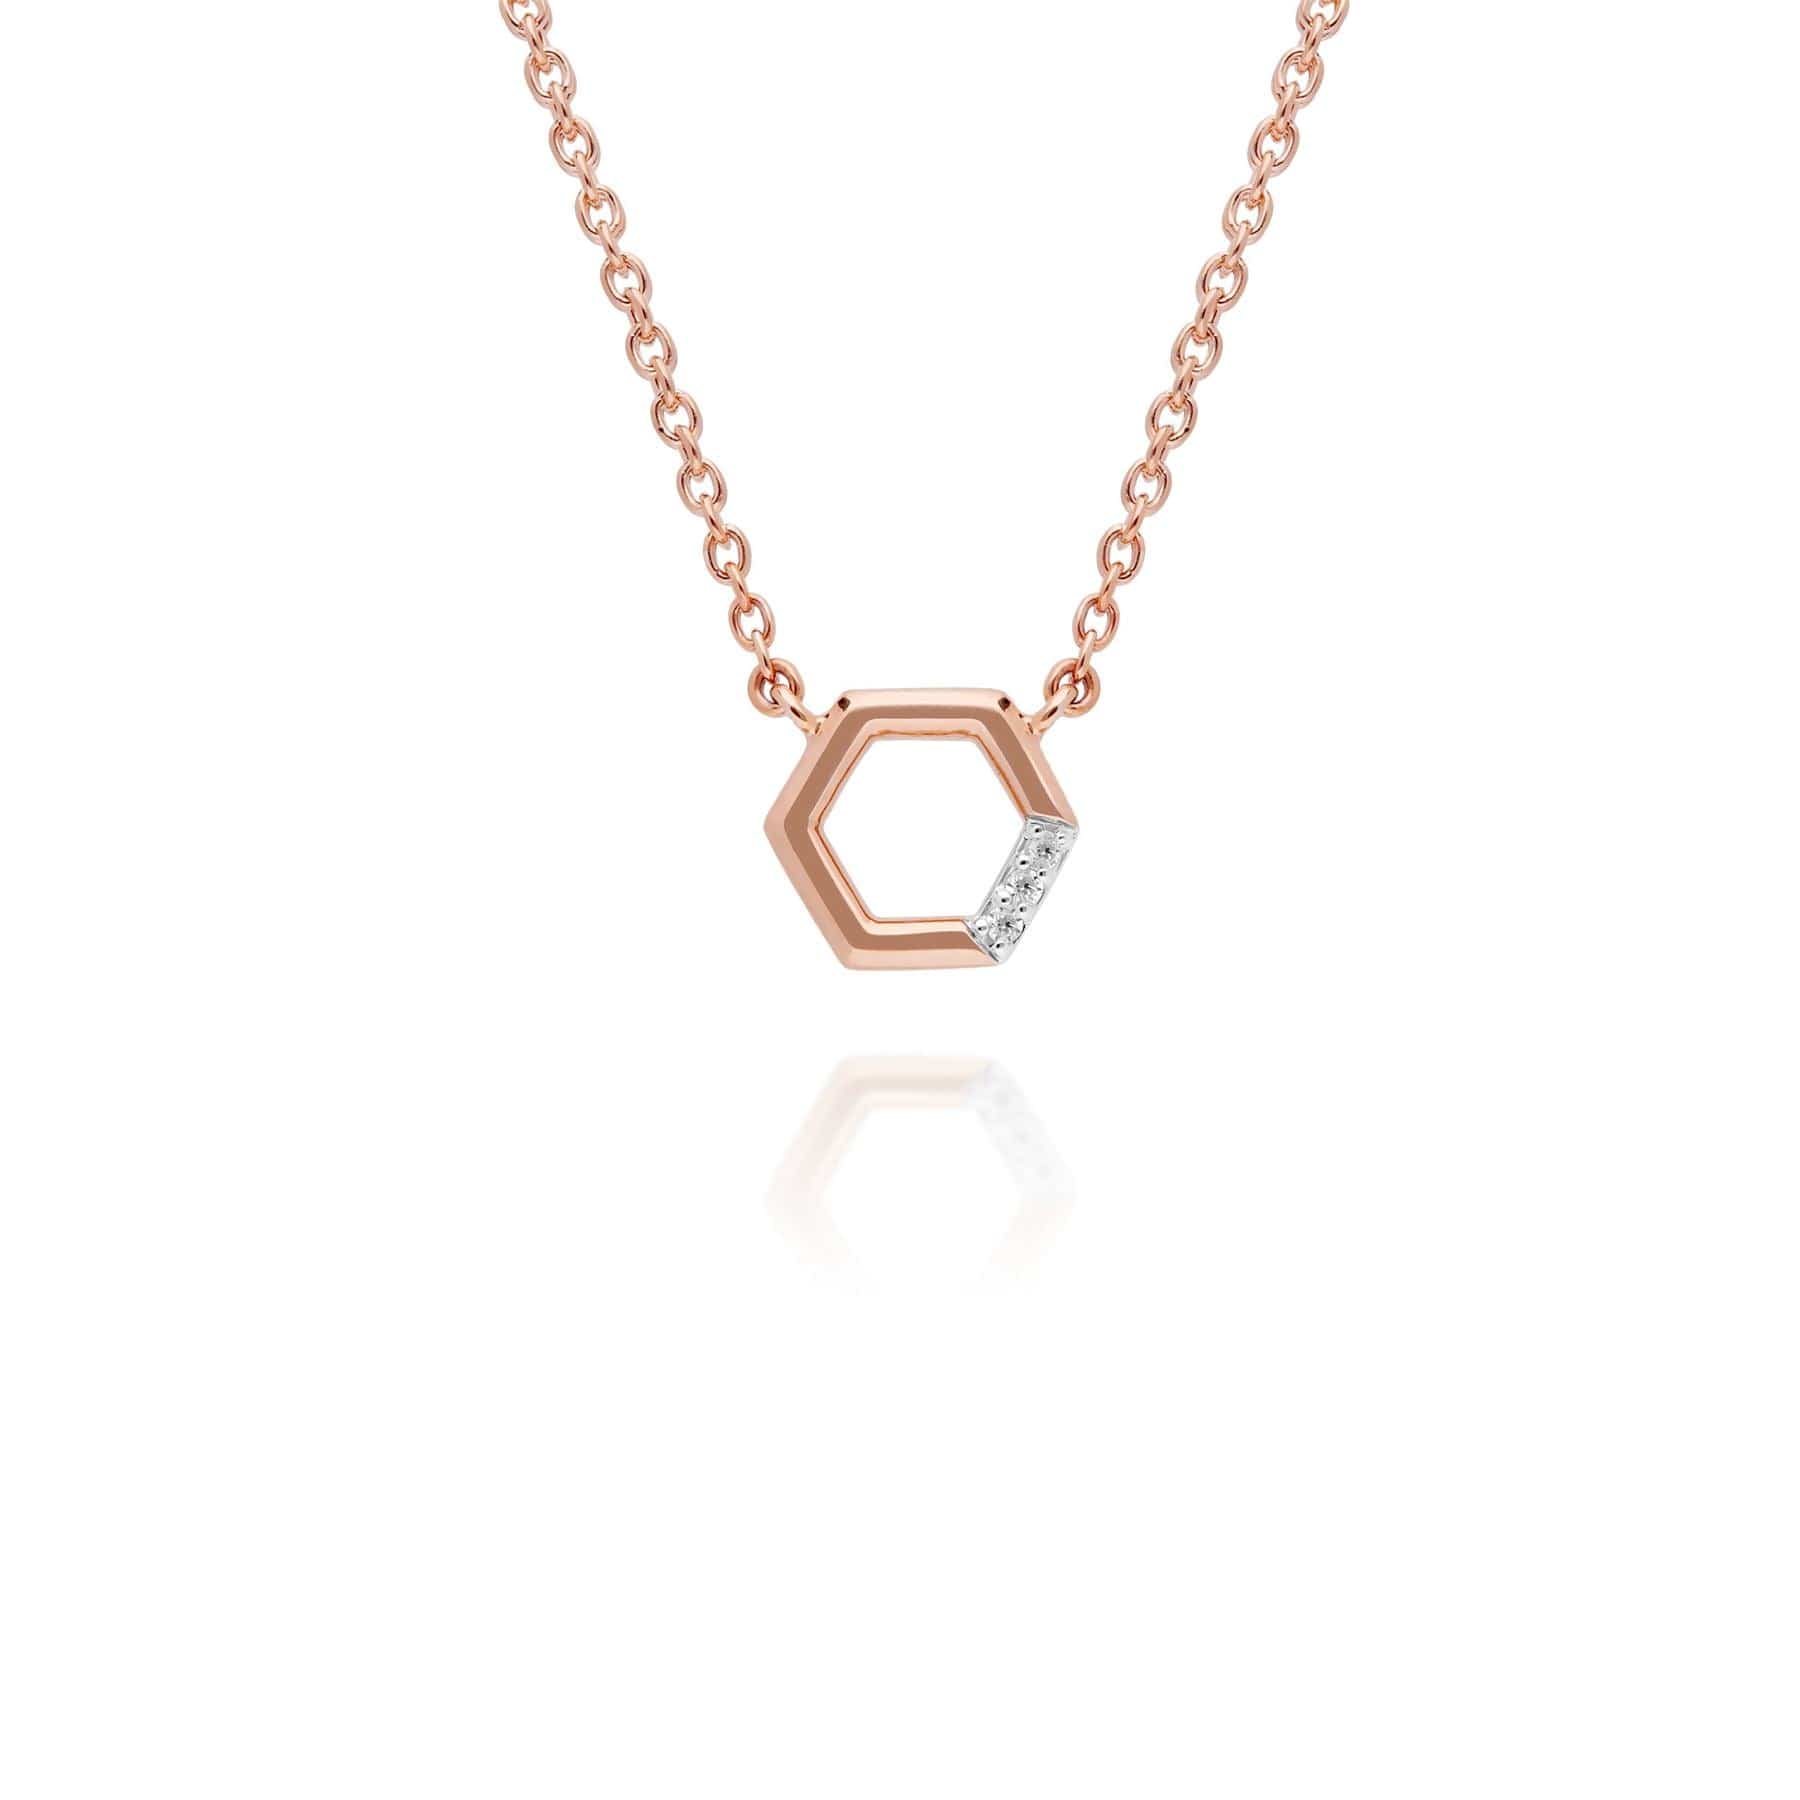 Photos - Pendant / Choker Necklace Diamond Pave Hexagon Necklace in 9ct Rose Gold